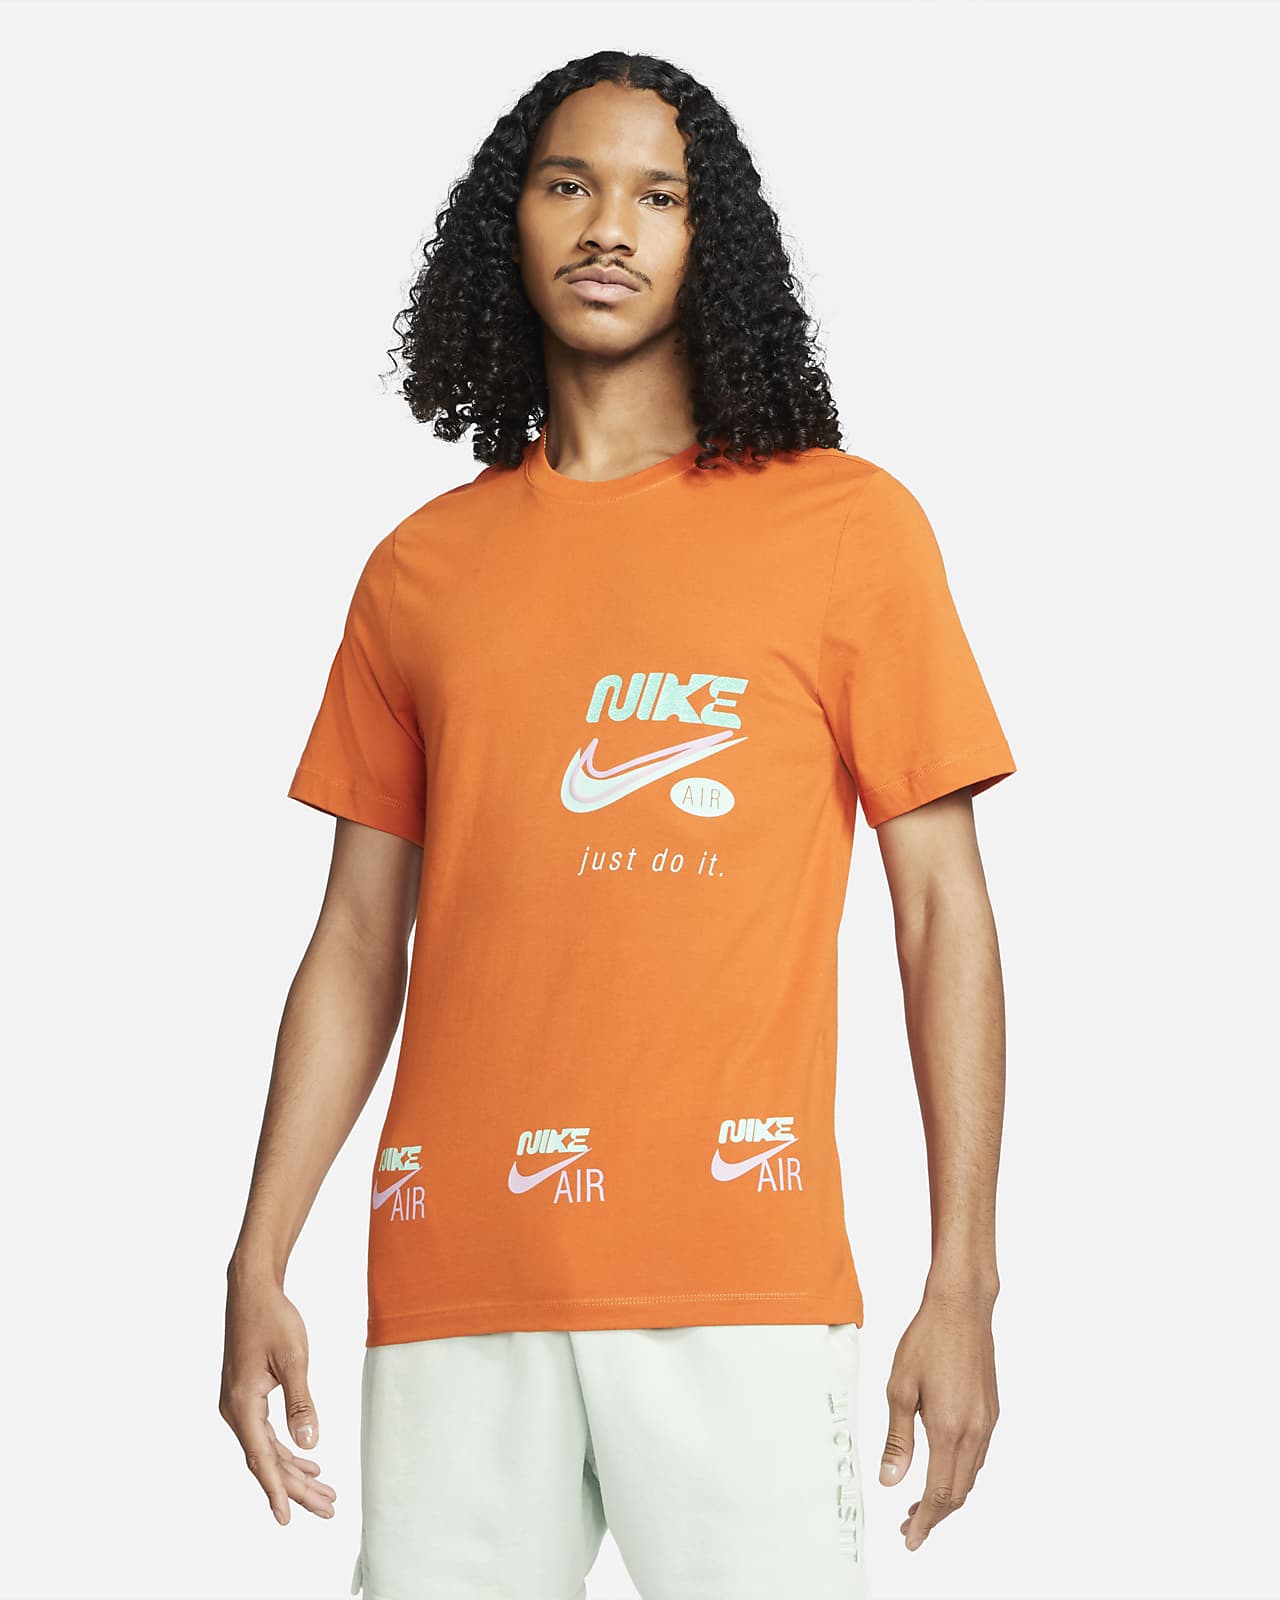 Buy > graphic nike shorts > in stock